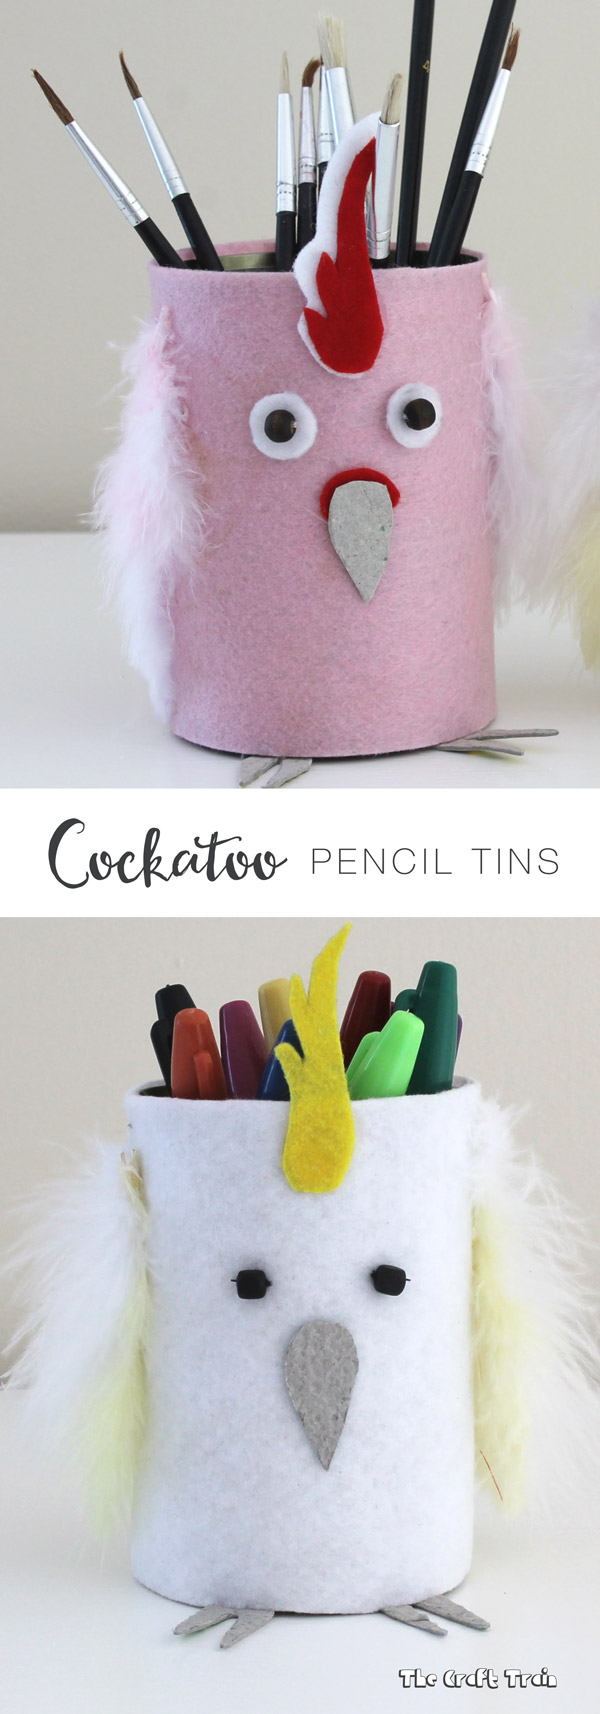 Create a cockatoo pencil tin using a repurposed tin can. This is a fun Australian animal themed craft for kids